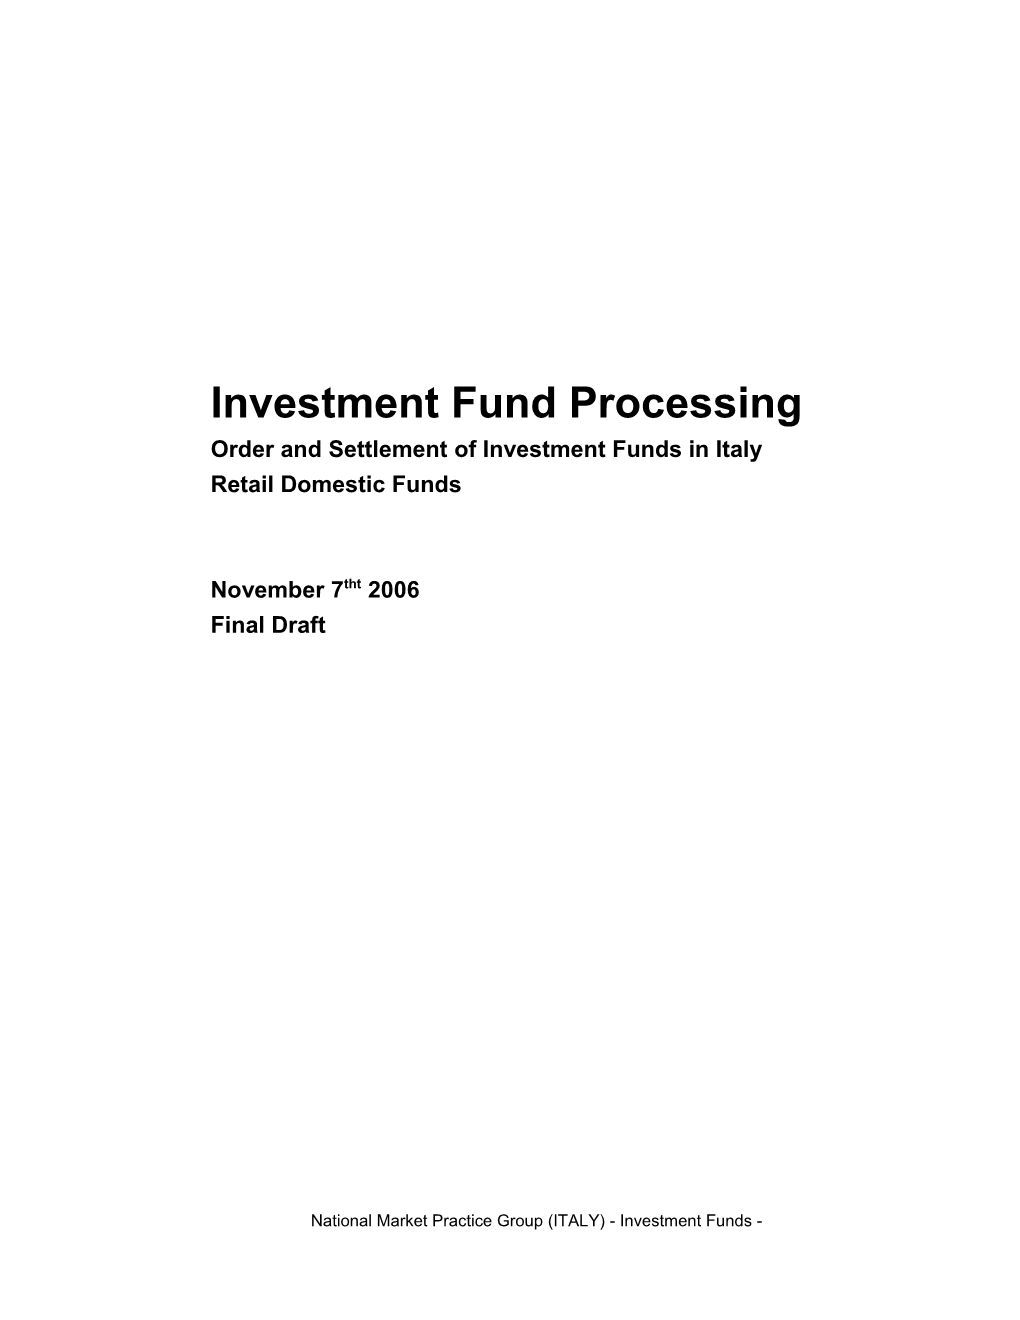 Order and Settlement of Investment Funds in Italy